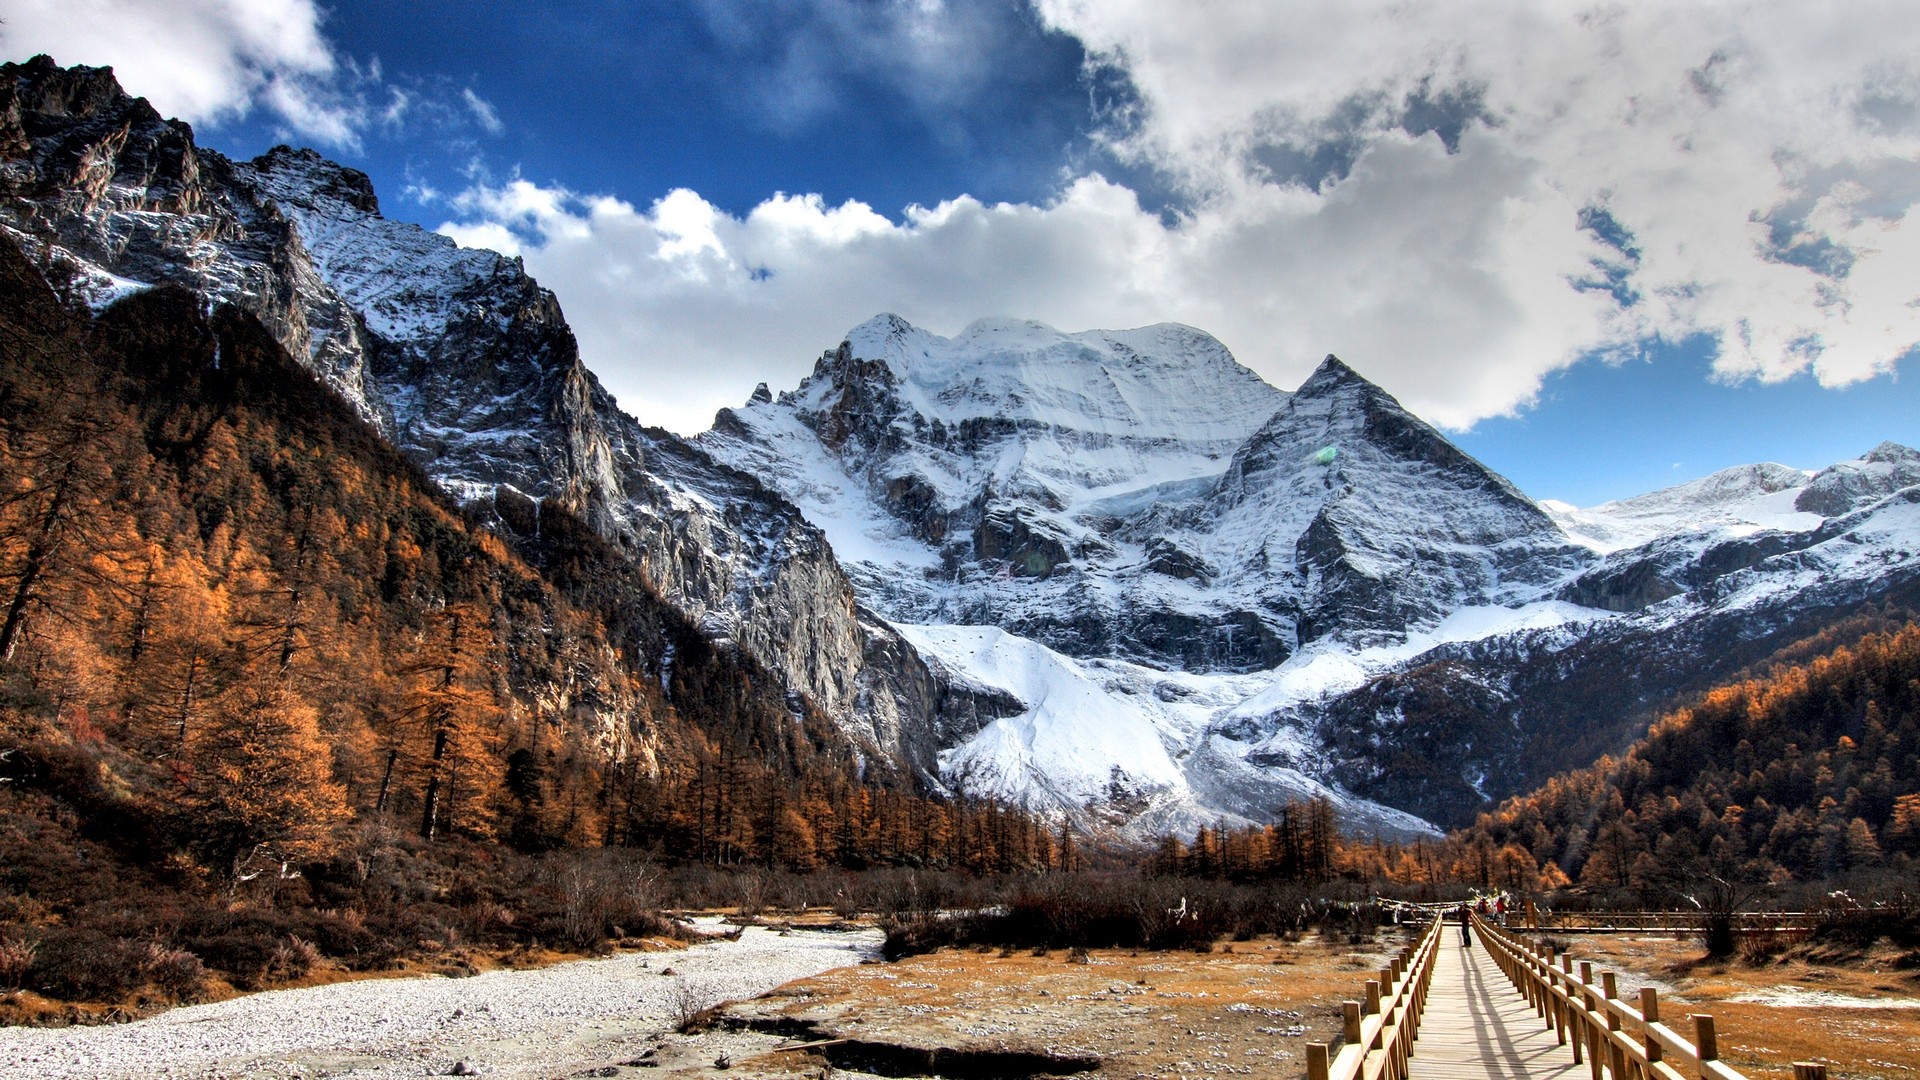 General 1920x1080 nature HDR landscape China mountains sky clouds snowy peak Asia